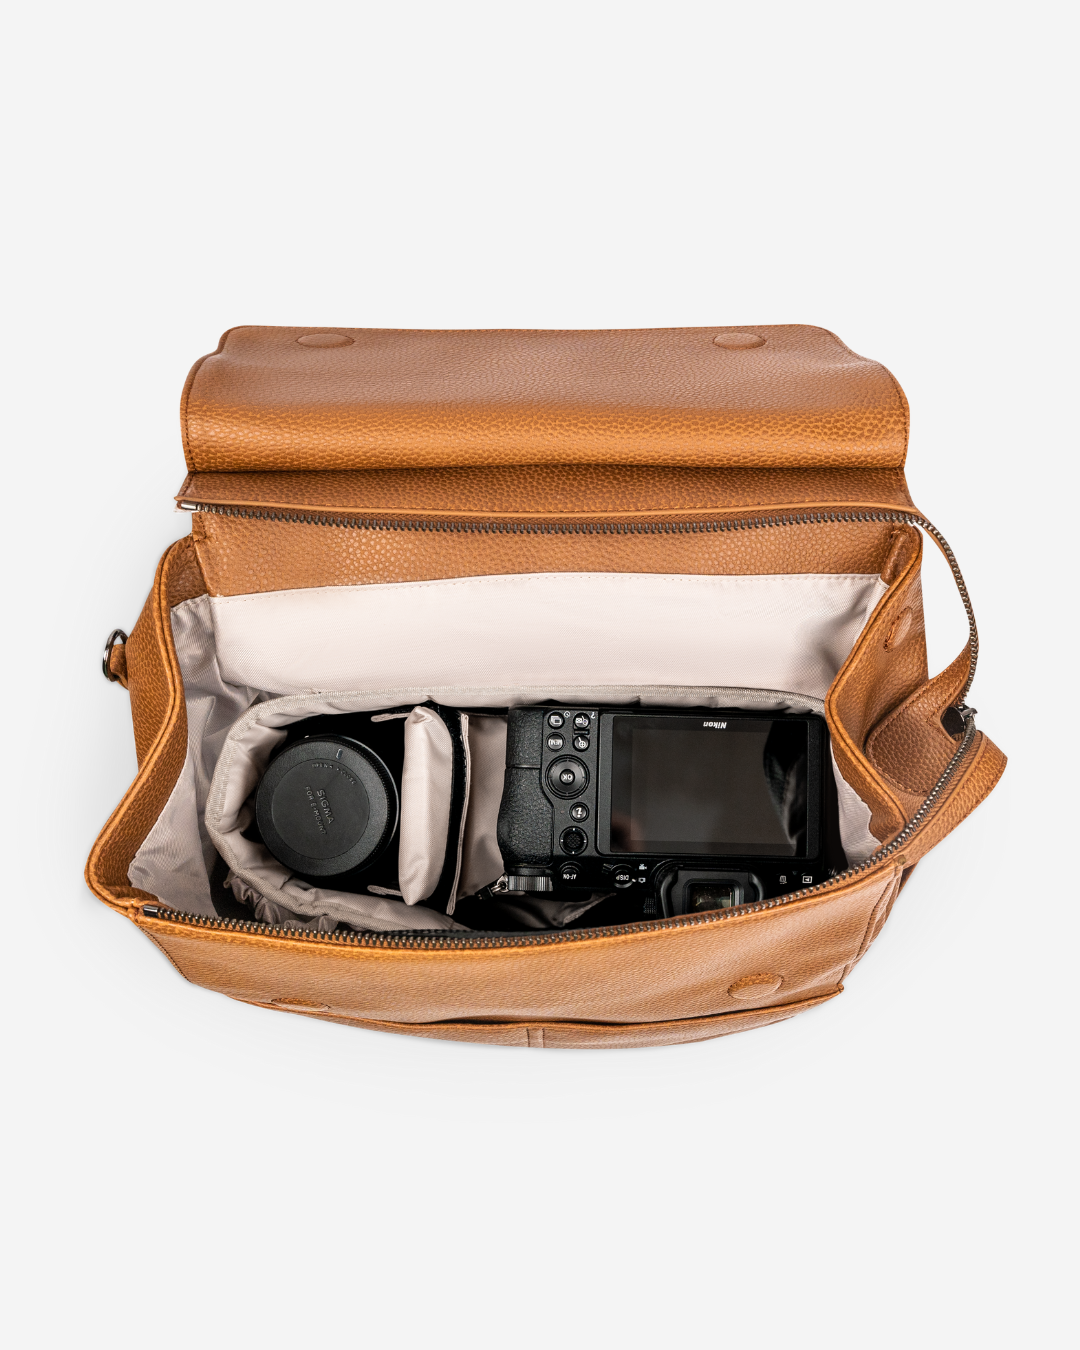 stylish camera bag backpack tan birds eye view with camera and lens inside padded lining